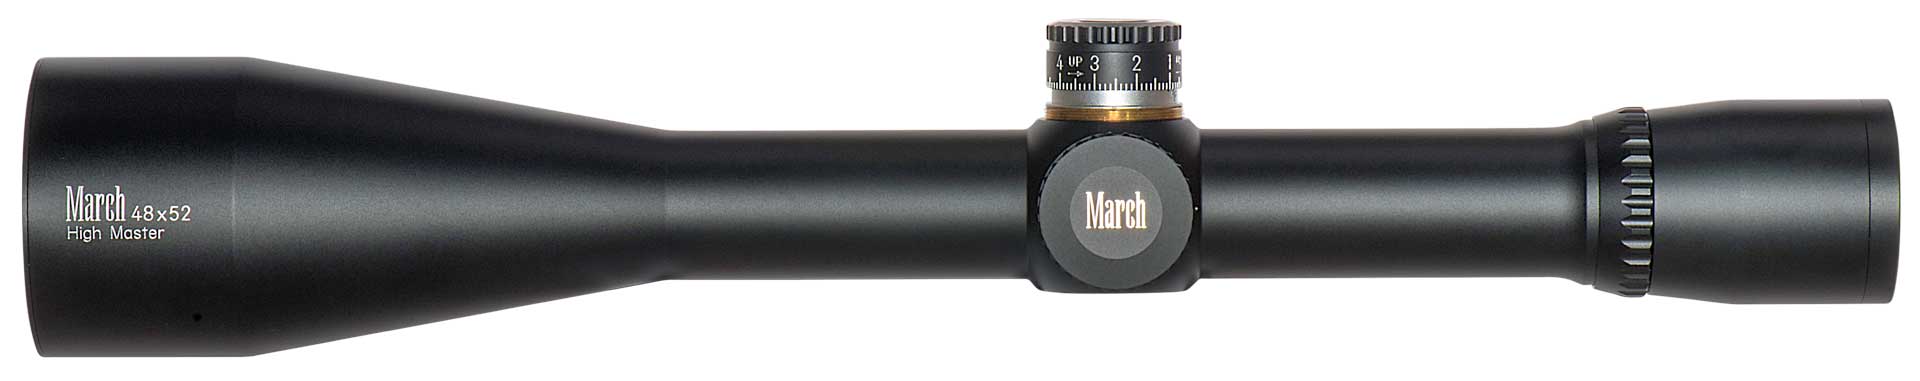 March 48×52 BR. HIGH MASTER SFP Rifle scope-2